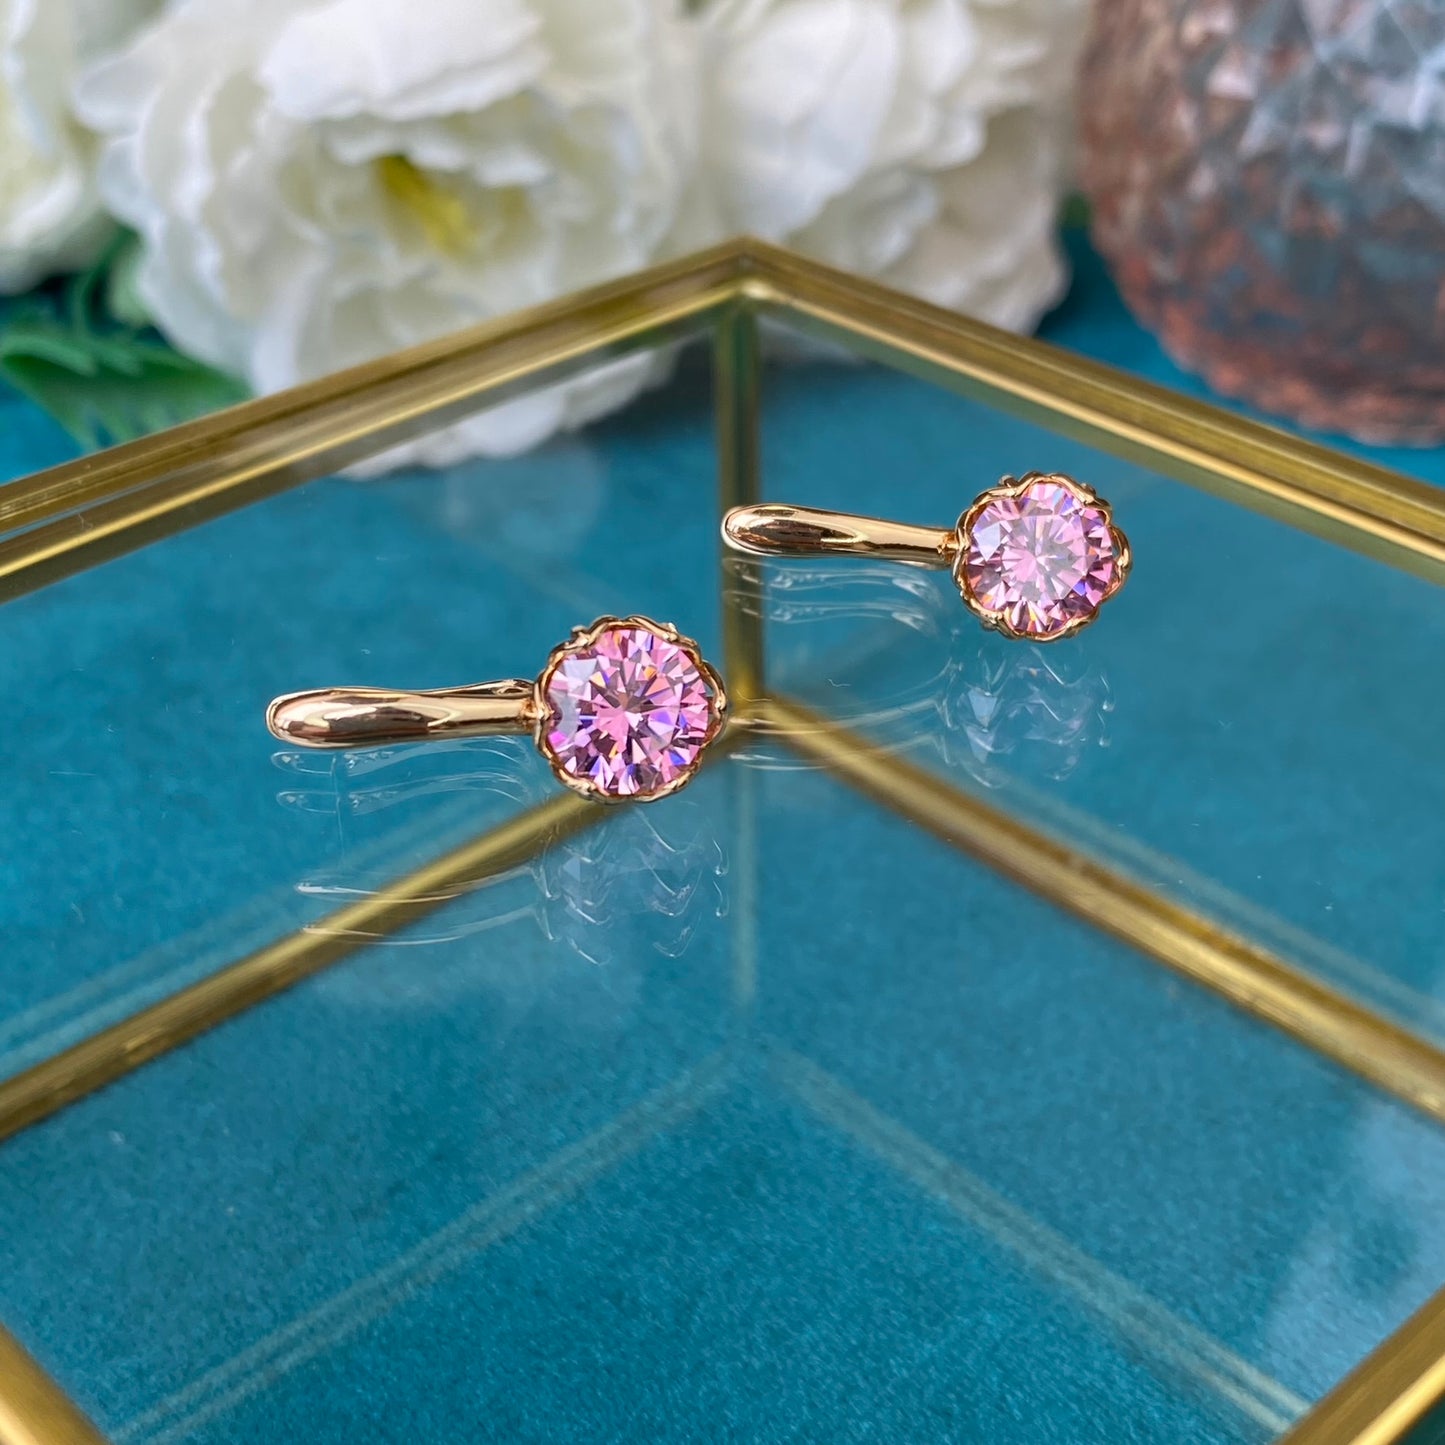 Gold Plated Stainless Steel Earrings with decorative pink crystal